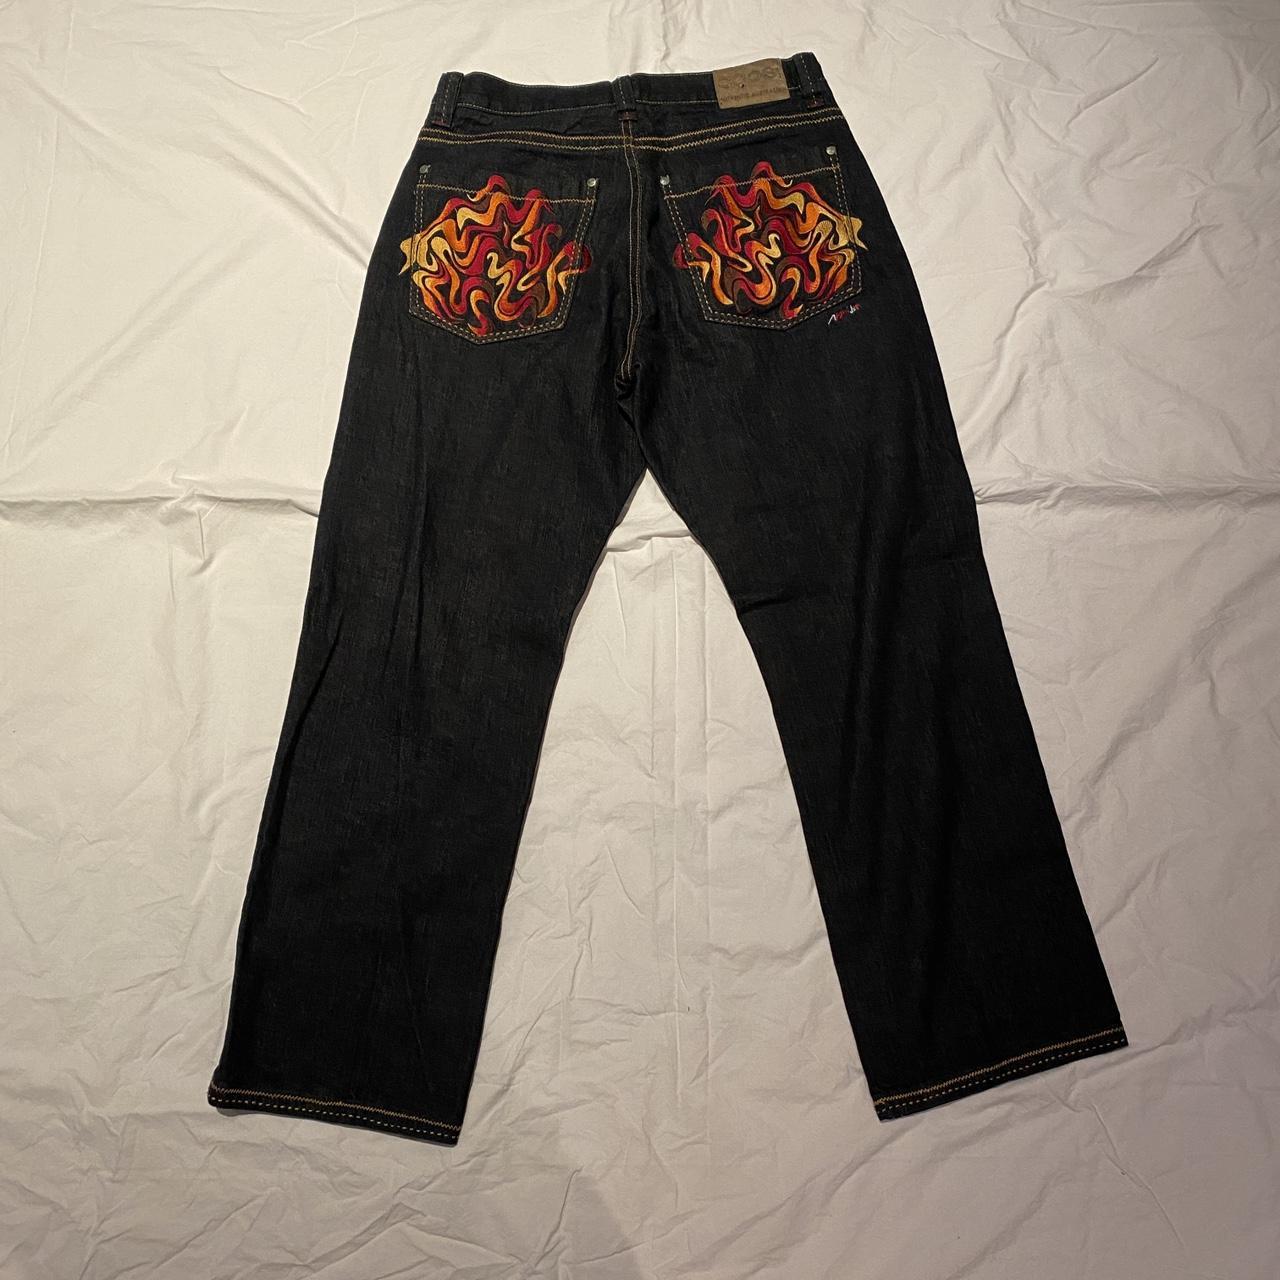 Coogi Men's Navy and Red Jeans